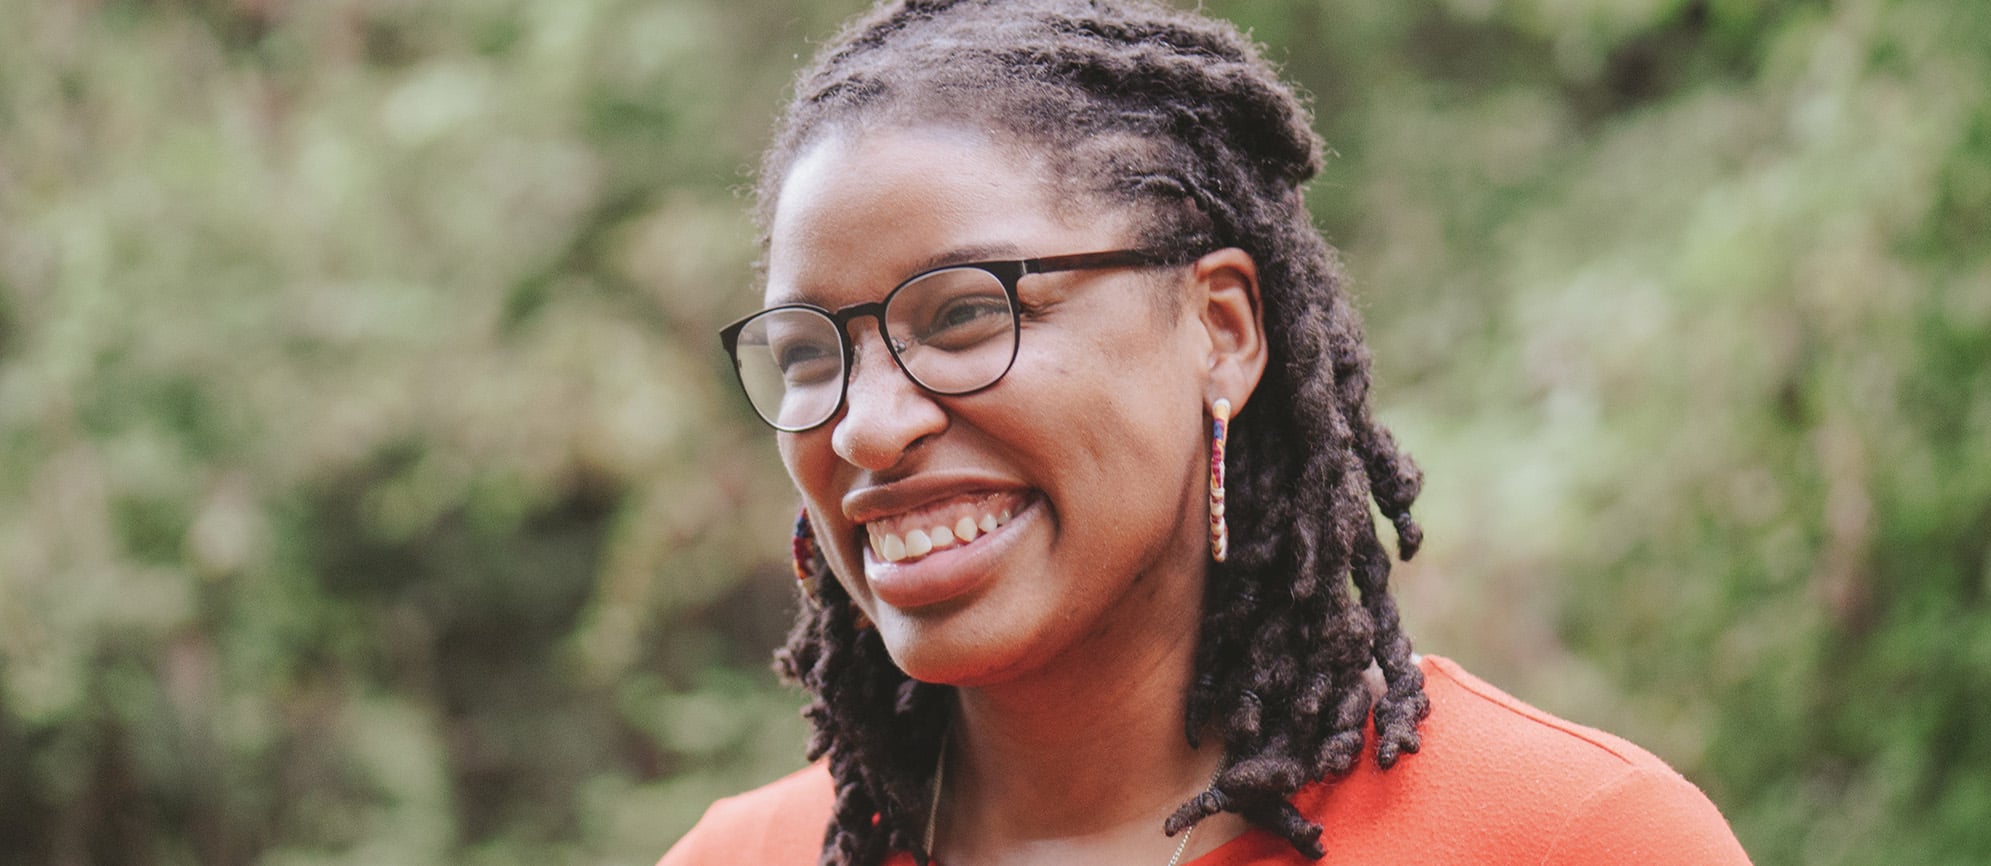 Black woman with glasses in a park smiling